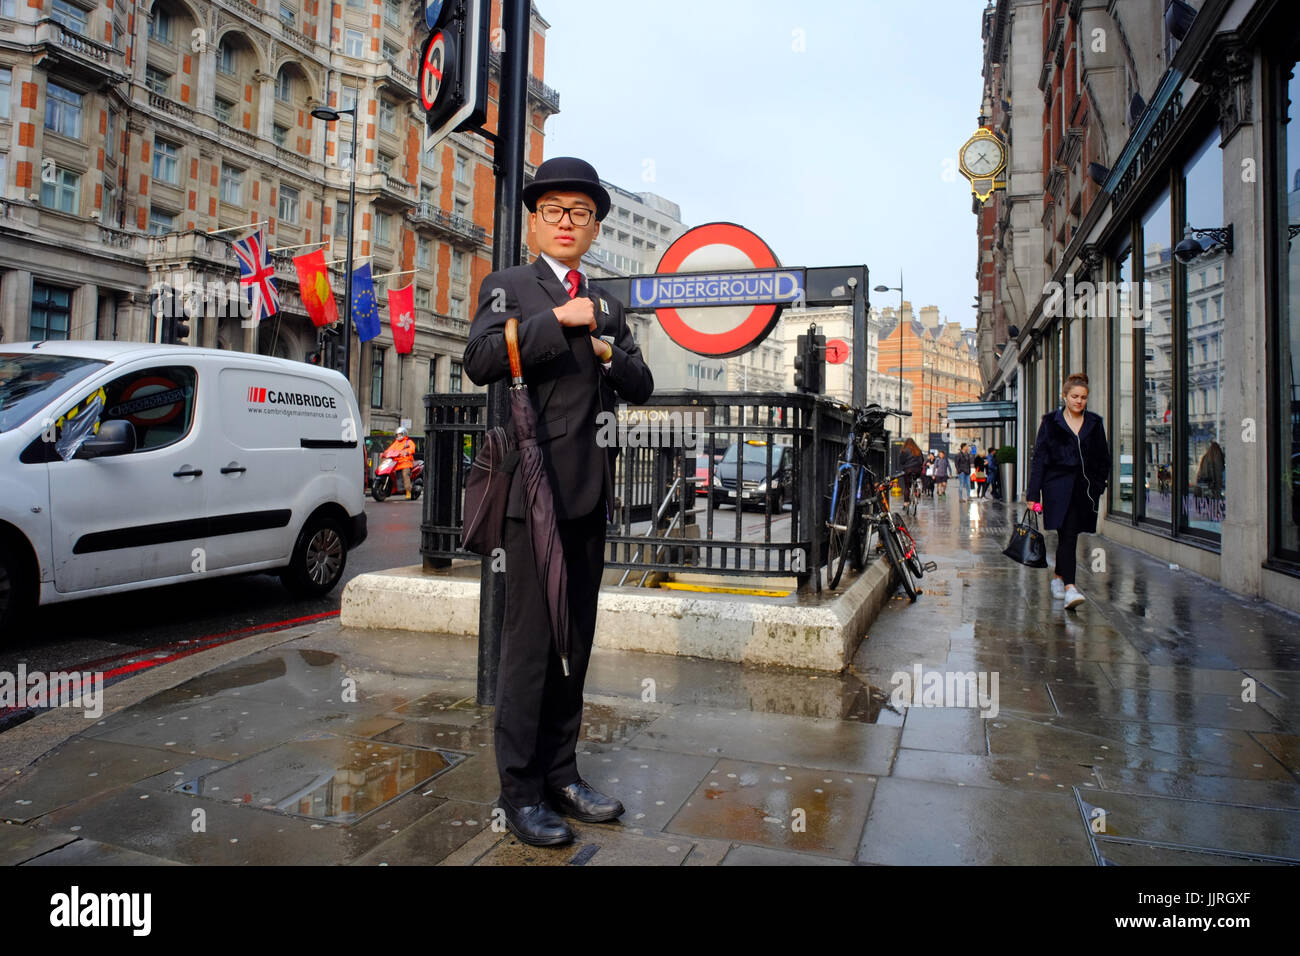 Oriental Man in Suit and bowler hat standing by undergroud station entrance in Knightsbridge, London, UK Stock Photo